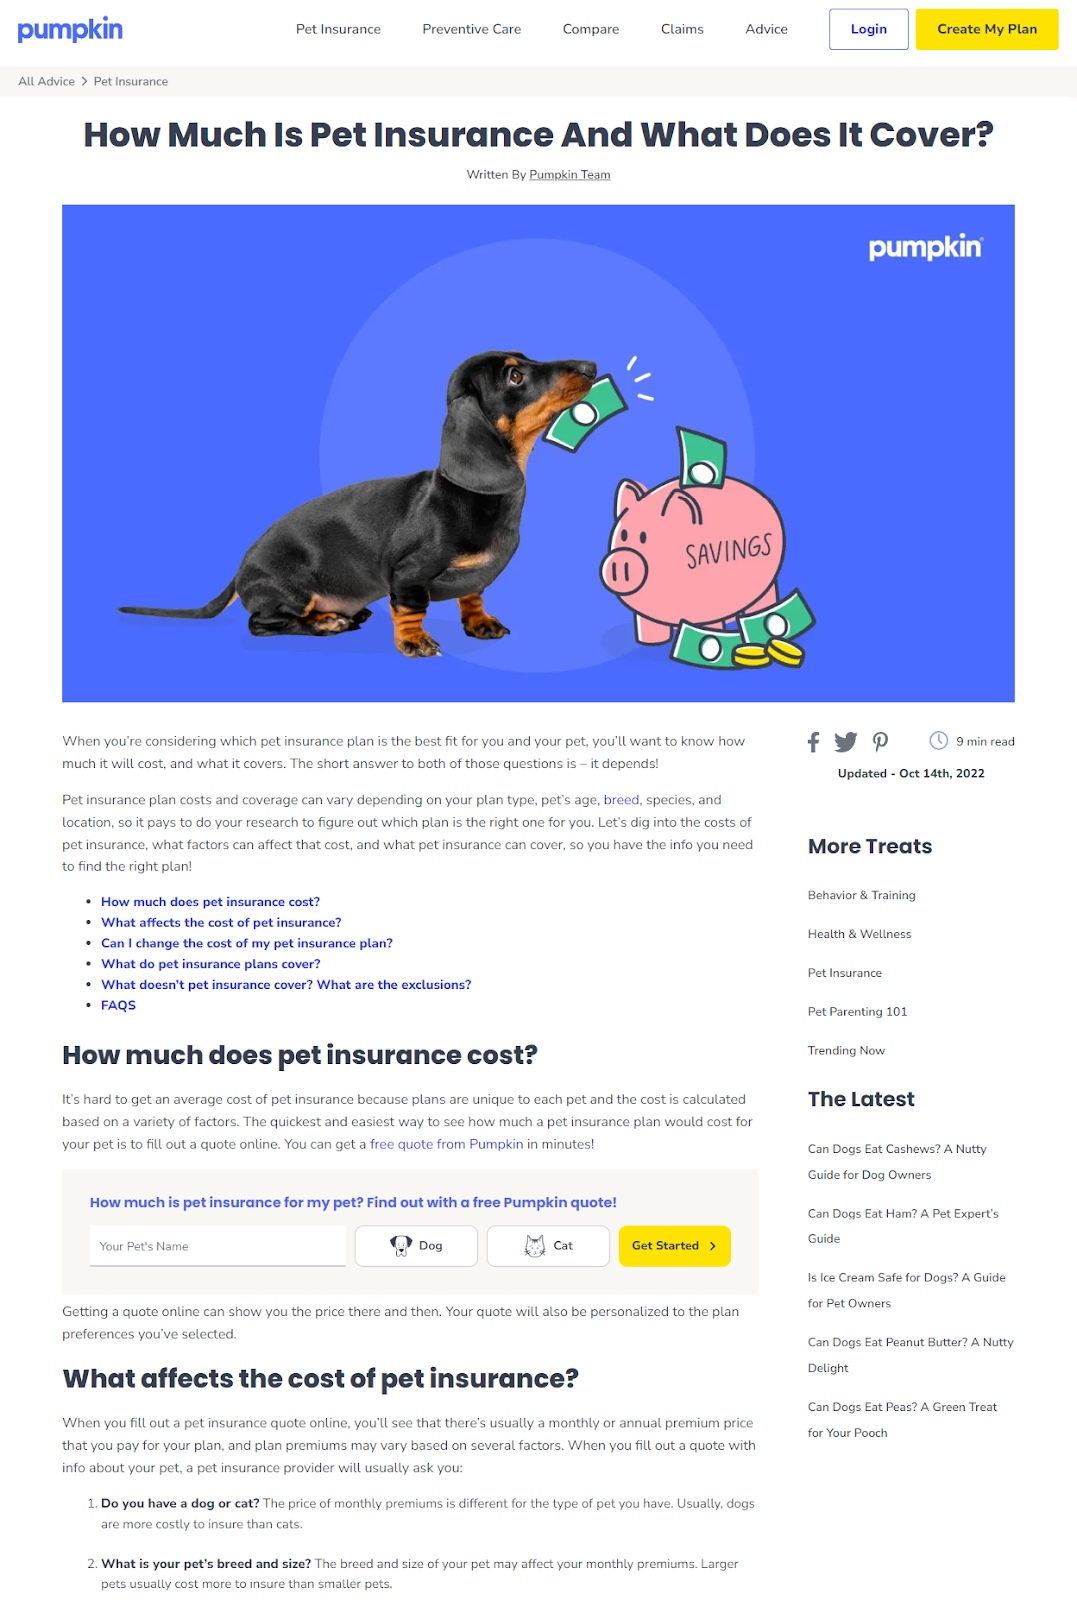  cost of pet insurance